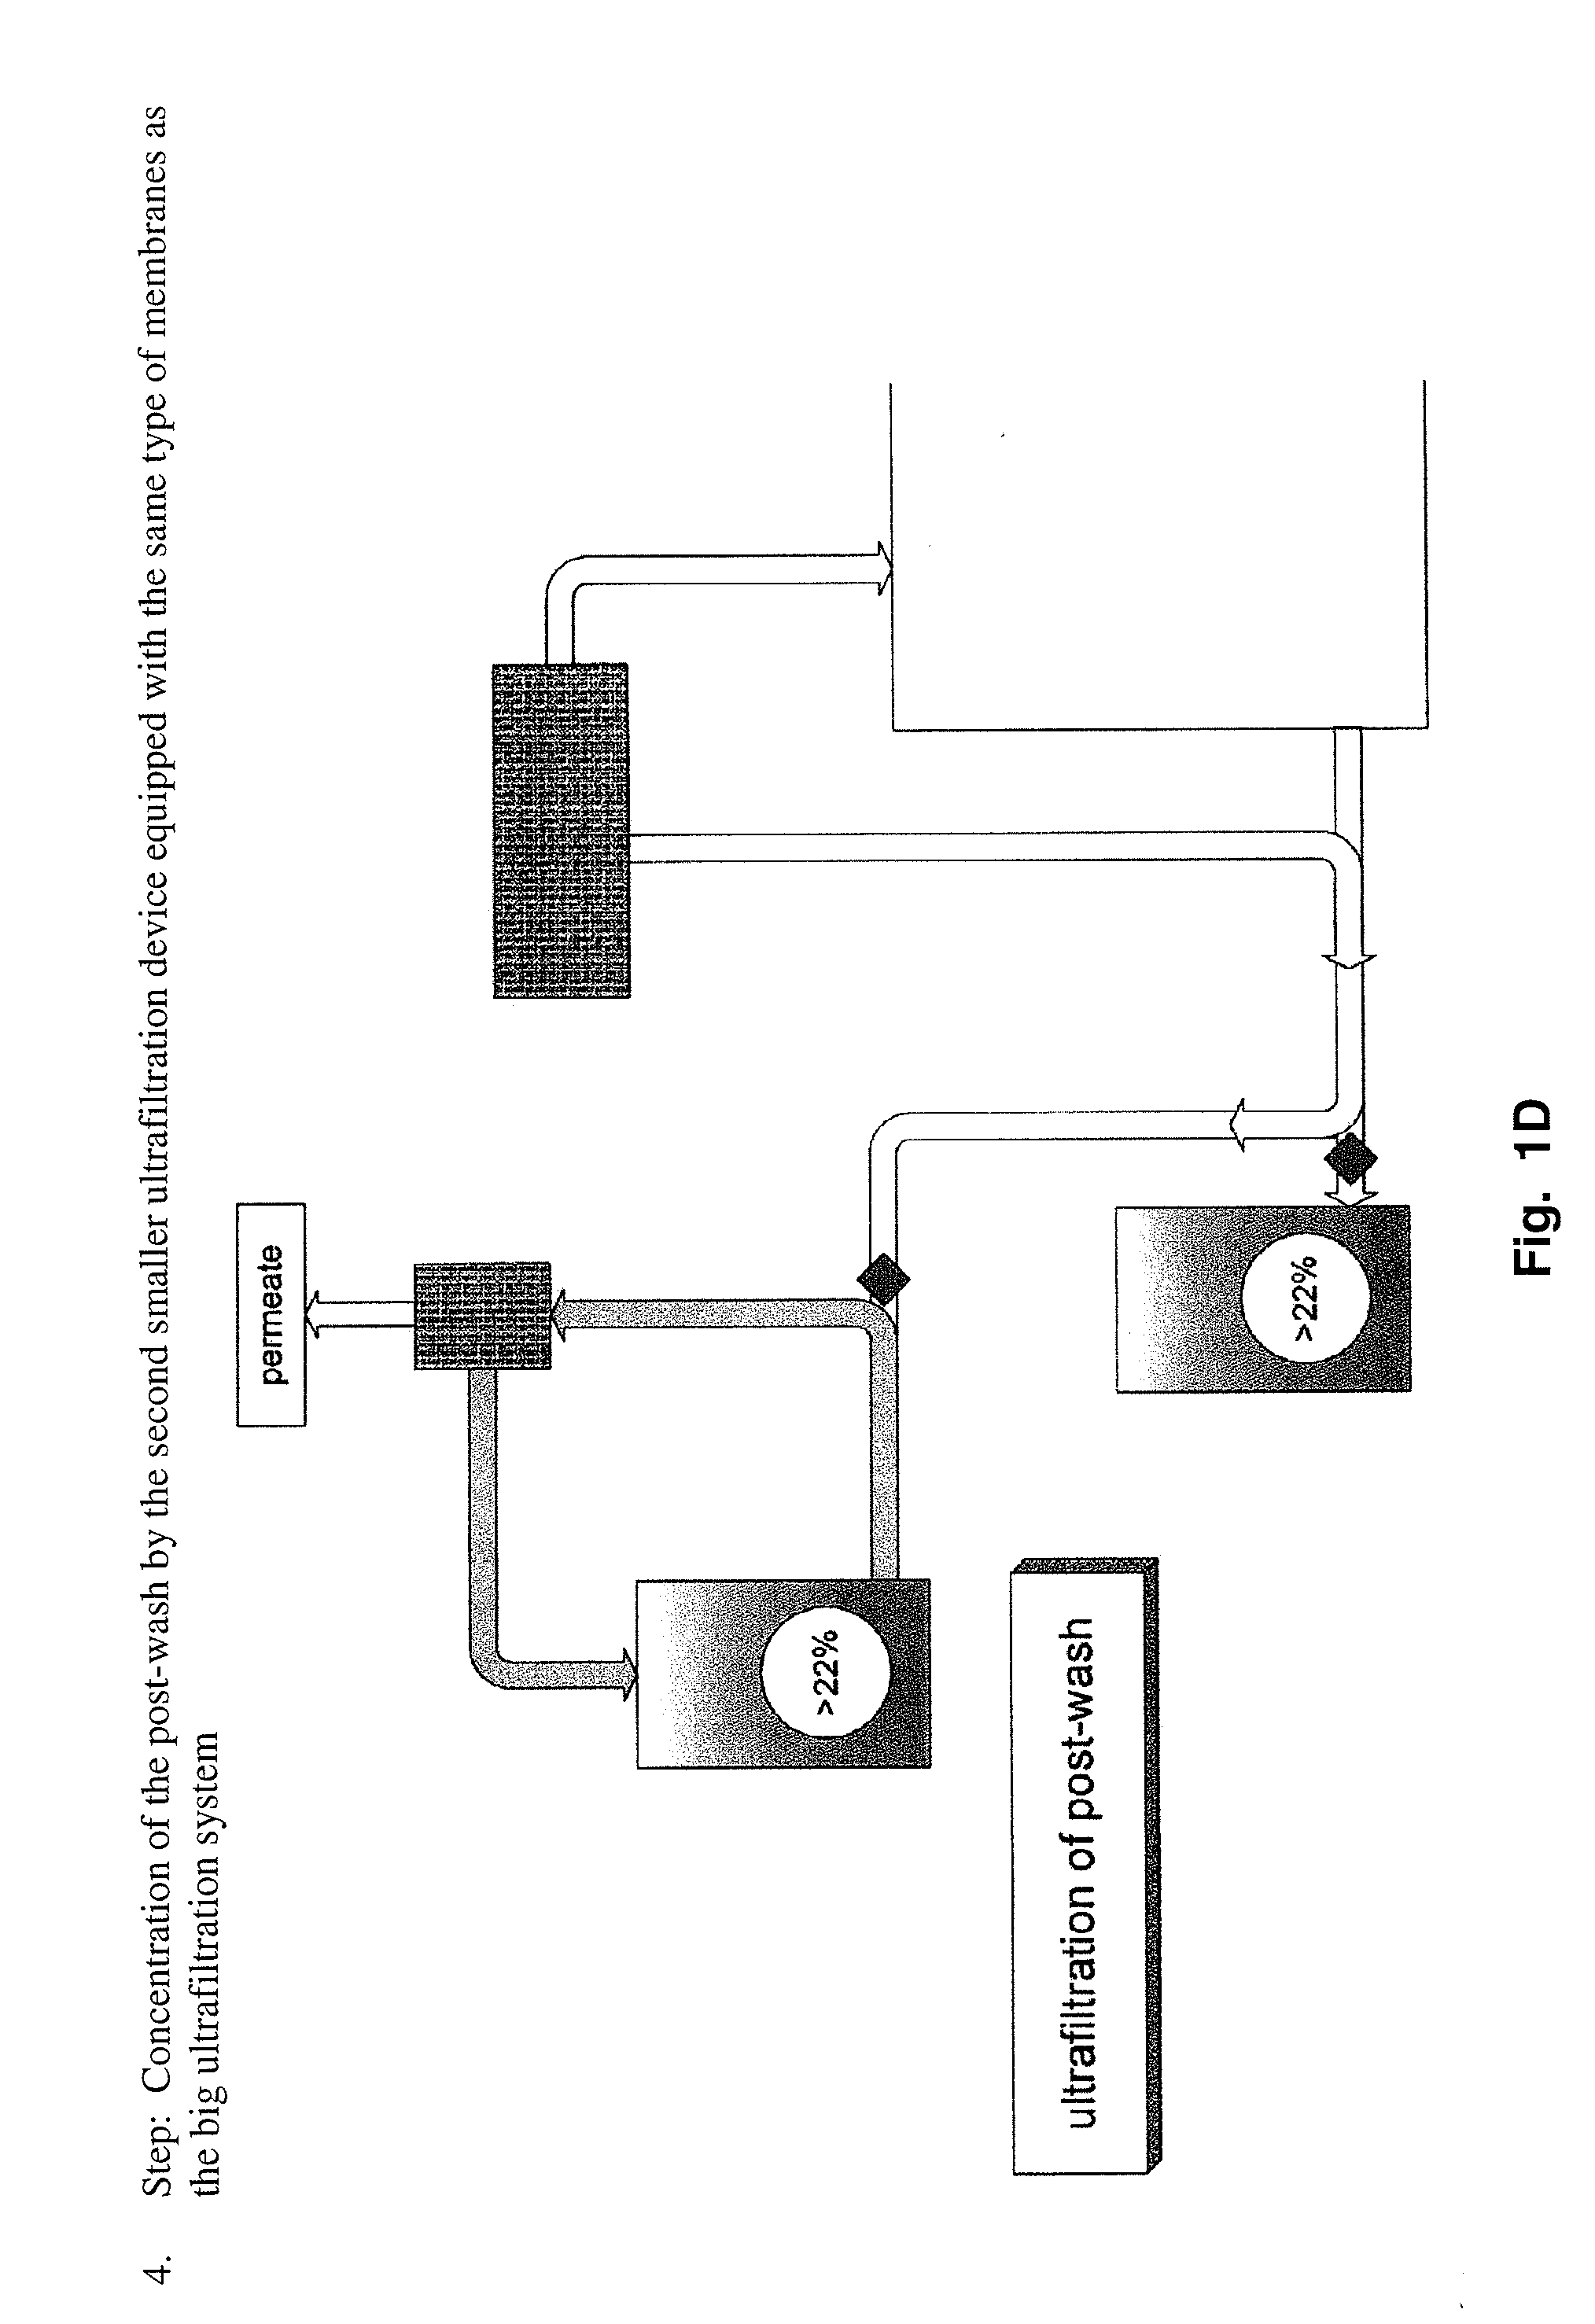 Method to produce a highly concentrated immunoglobulin preparation for subcutaneous use